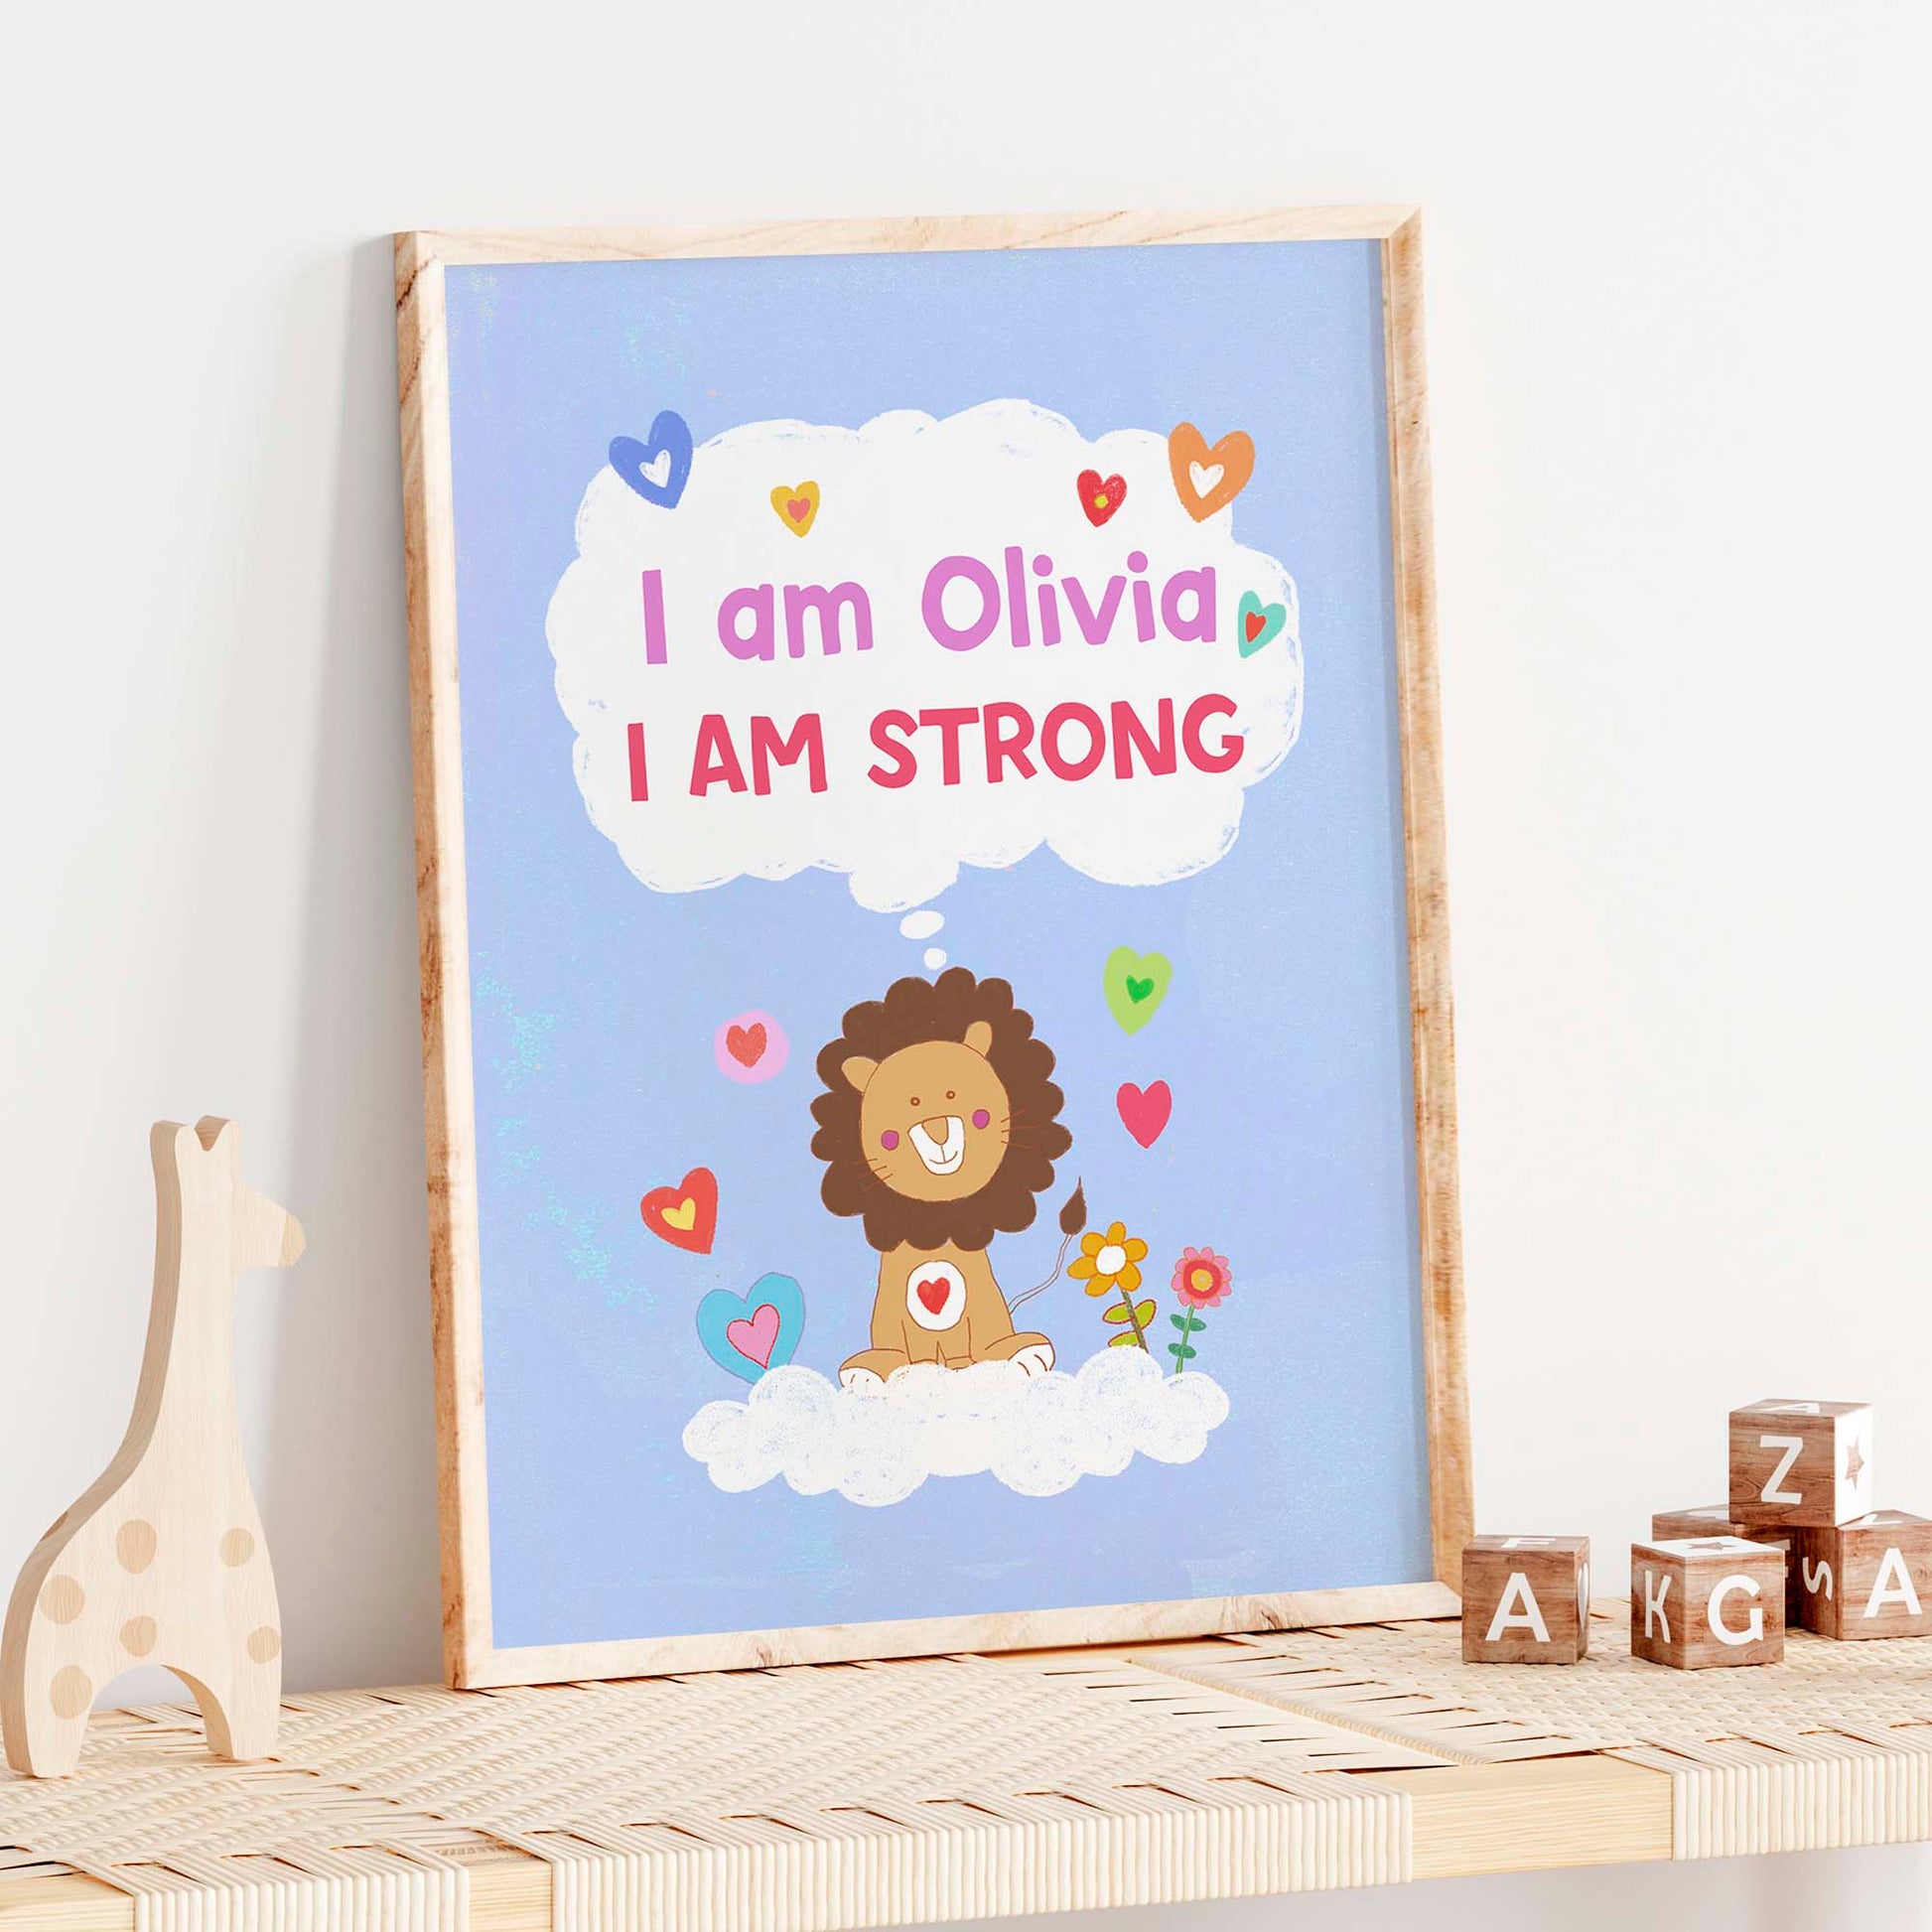 Regal lion in a frame with empowering affirmations, a bold addition to kids' nursery wall art.